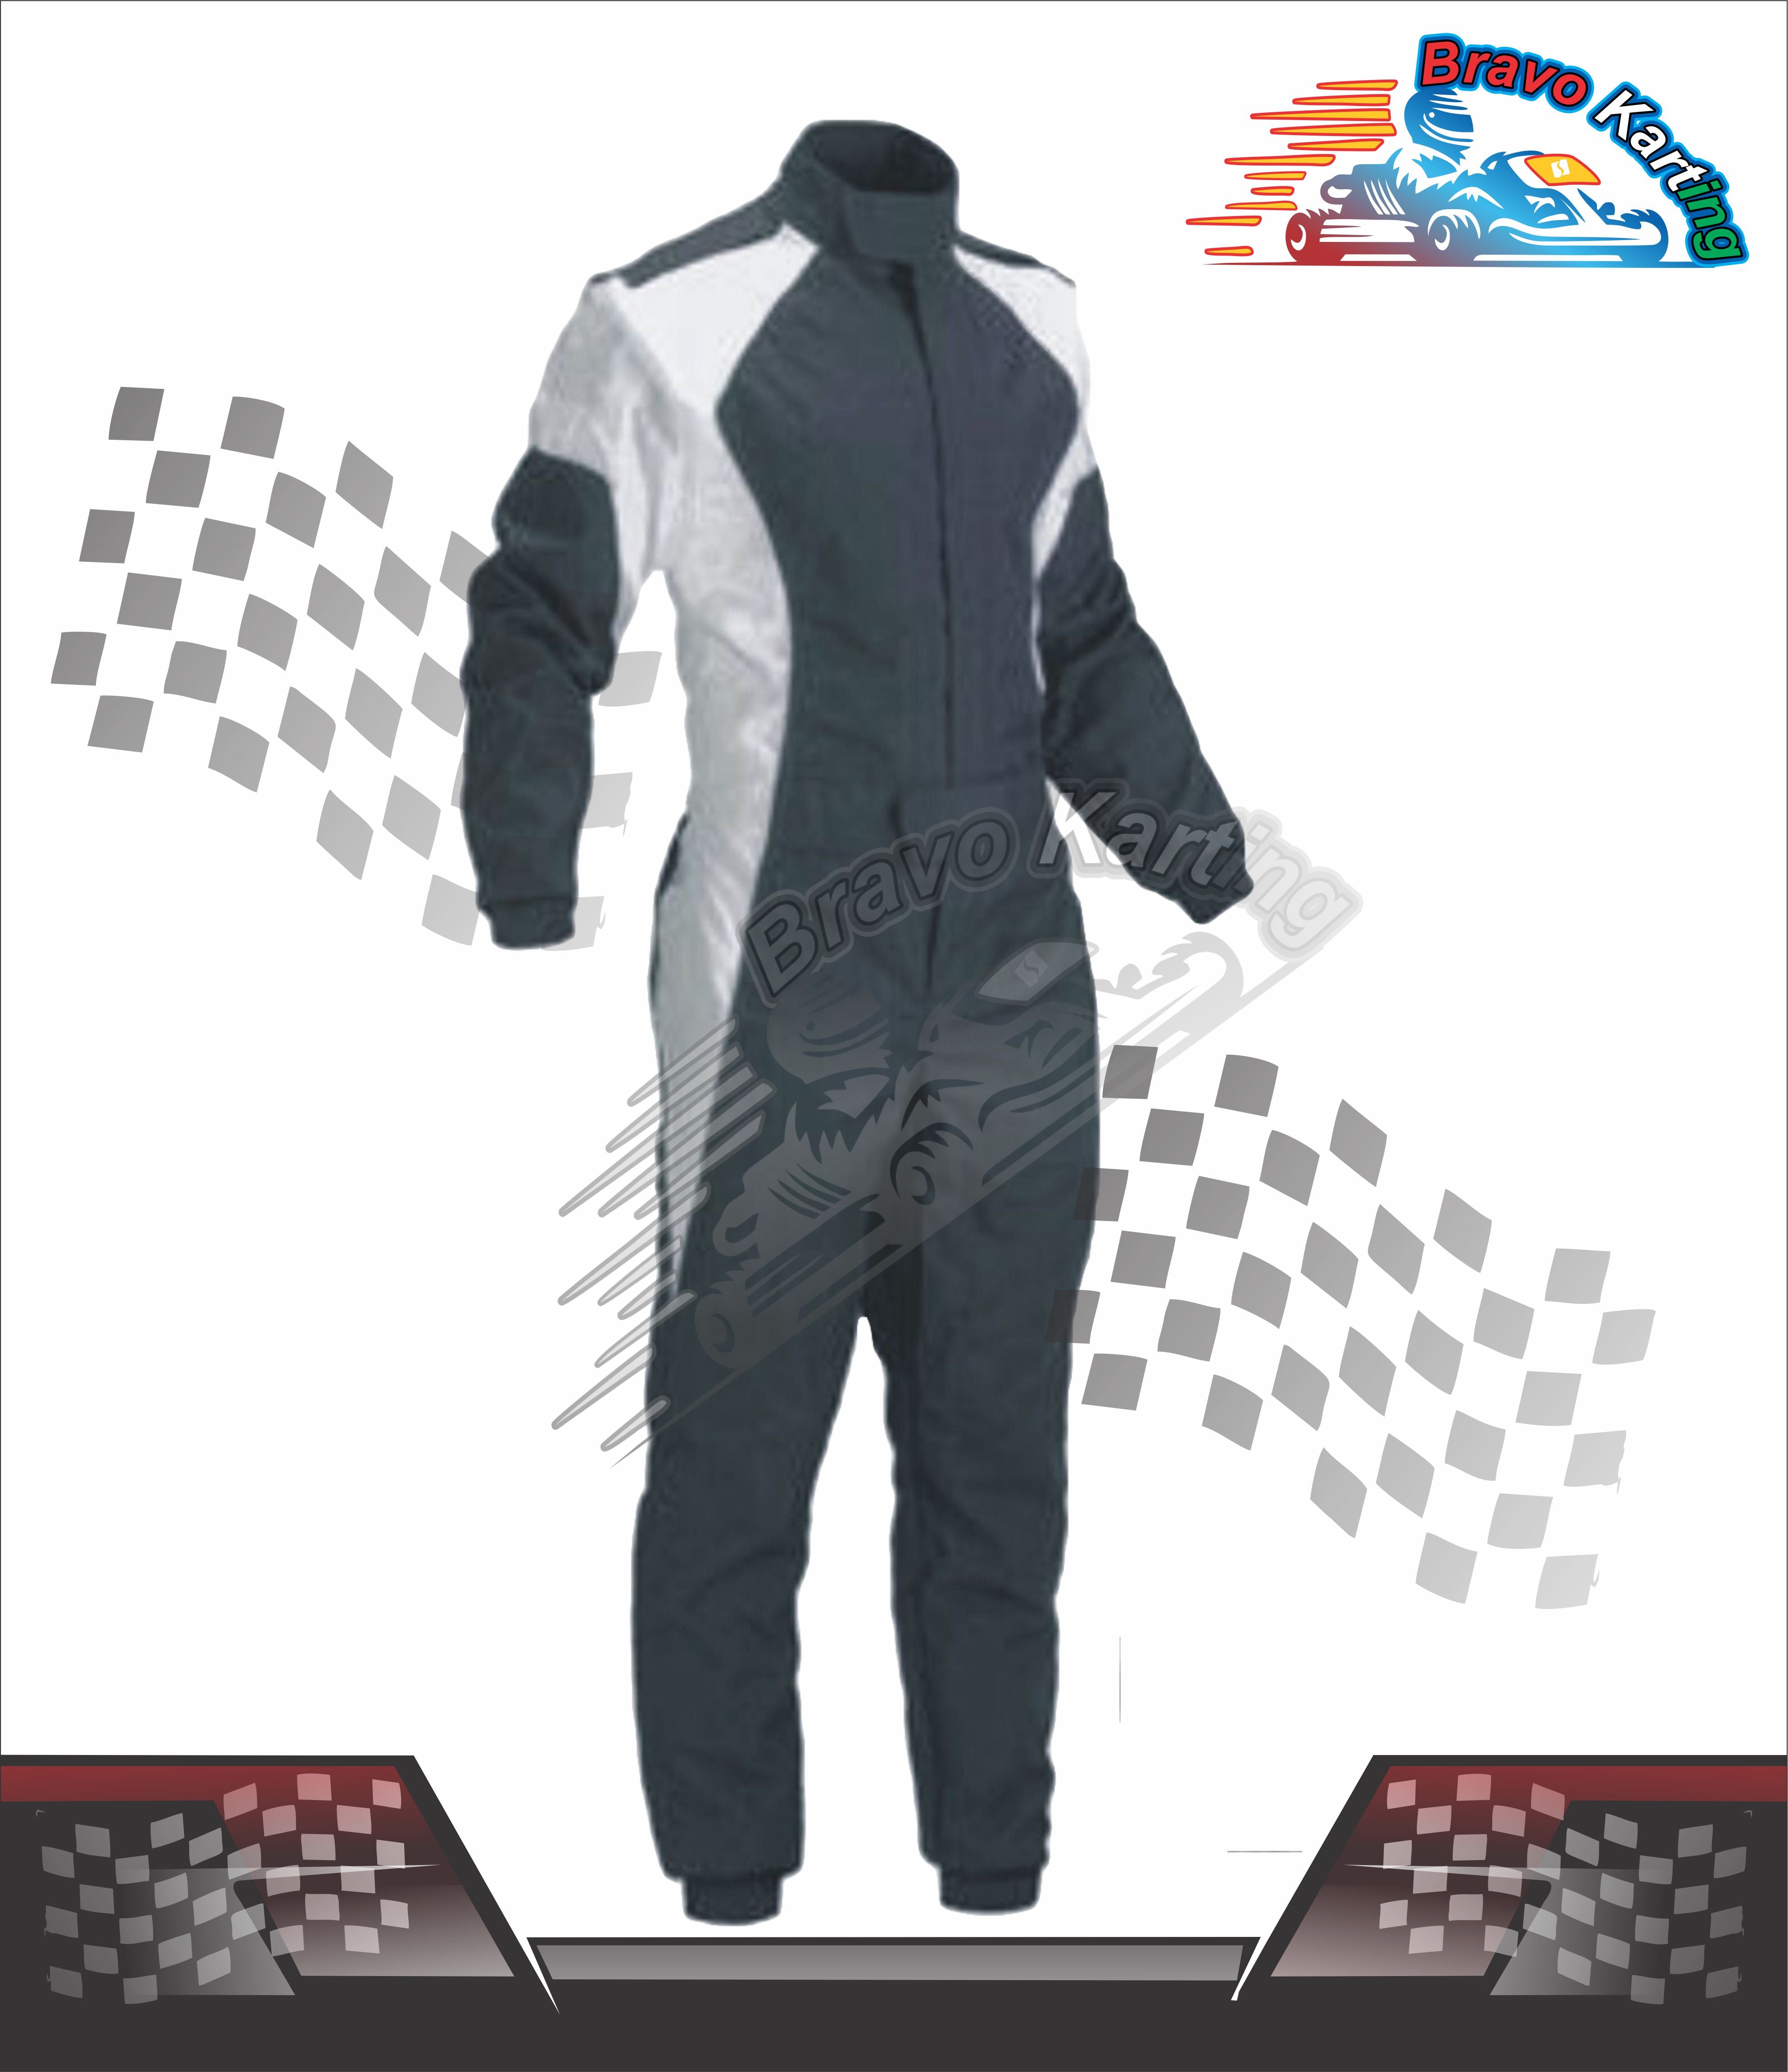 HIRE Go Kart Race Racing Suit for Karting Clubs